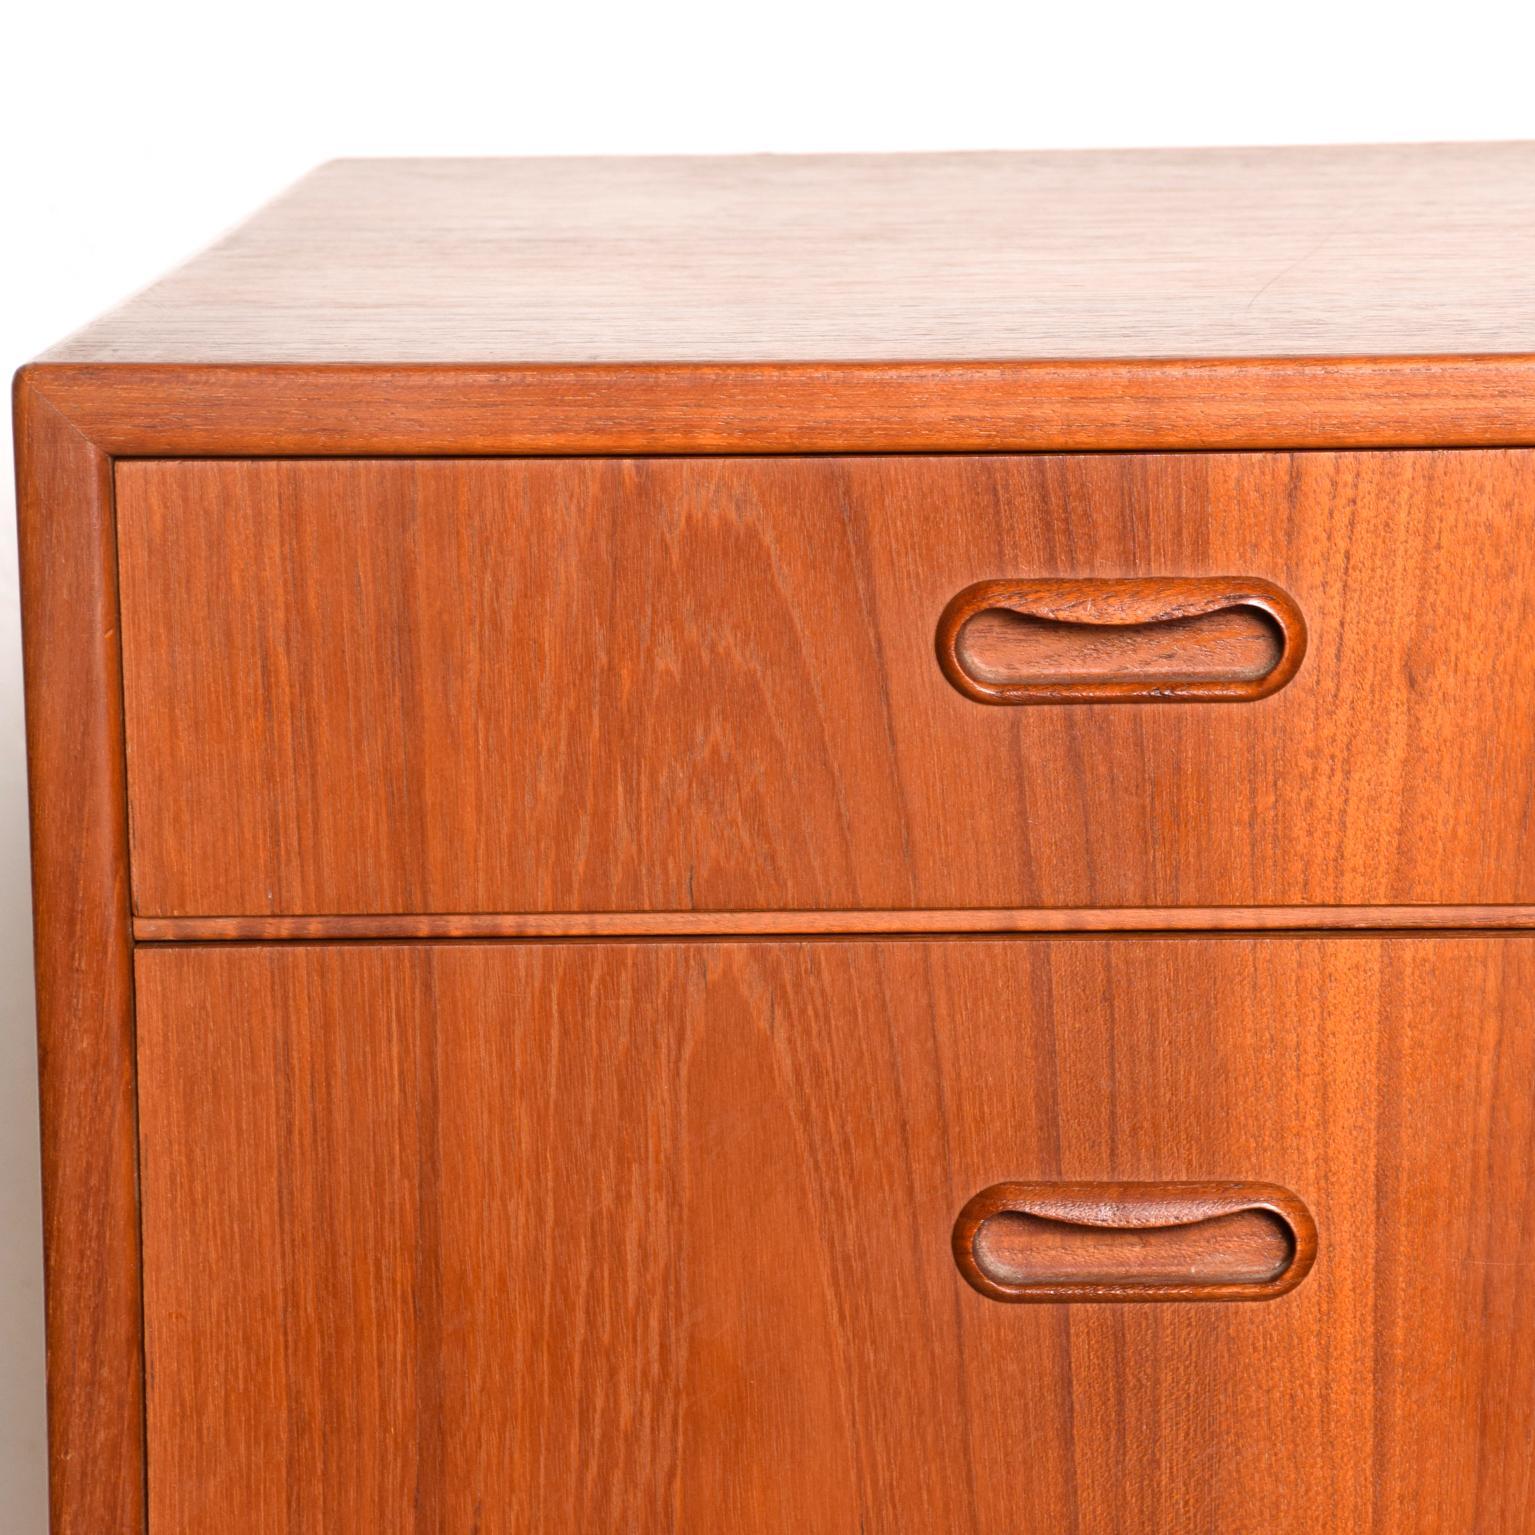 For your consideration, a highboy dresser-chest of drawers made in Denmark by FALSTER. Constructed with teak wood. All drawers are constructed with double dovetail joints and are open-close with ease. Stamped with FALSTER label in the top drawer.